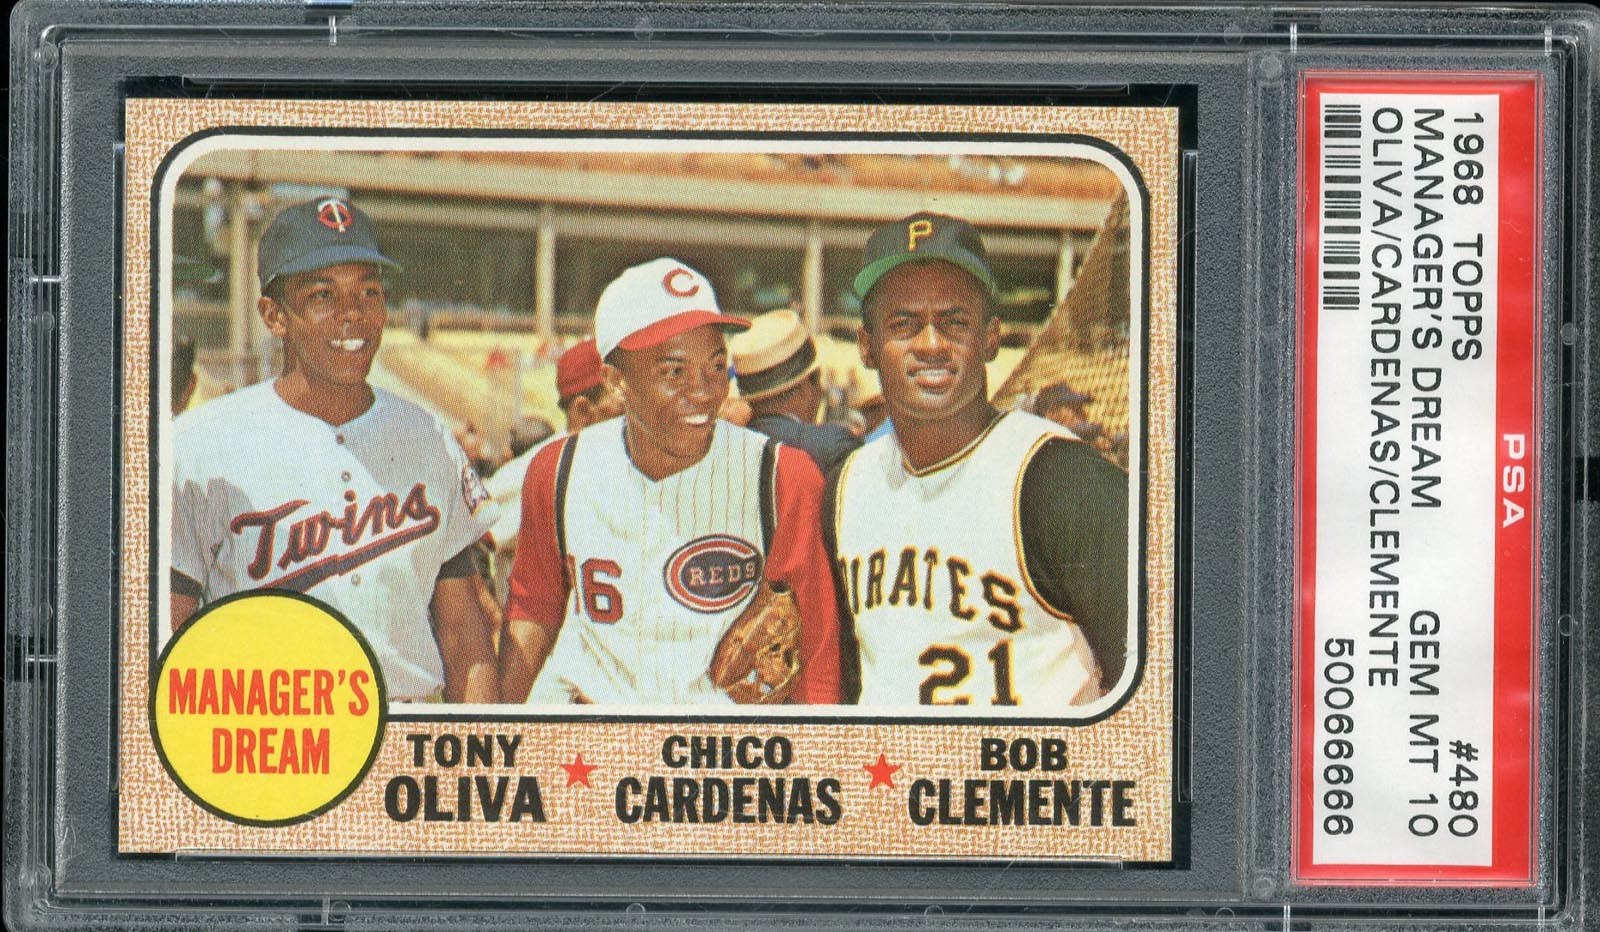 Baseball and Trading Cards - 1968 Topps #480 Manager's Dream w/Roberto Clemente PSA GEM MINT 10